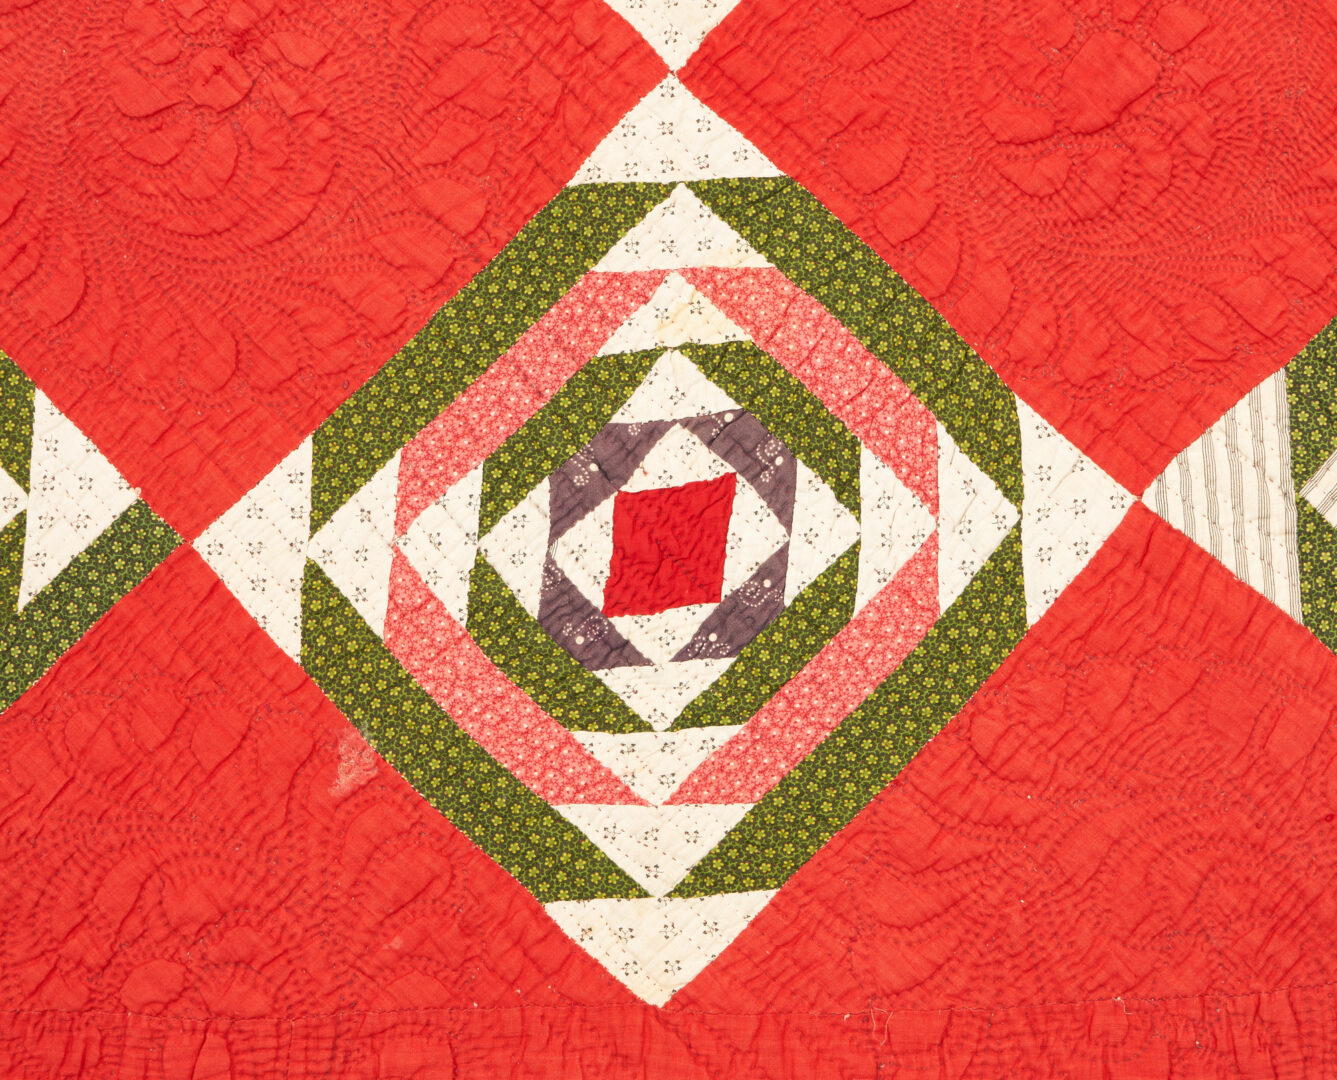 Lot 950: Log Cabin Quilt, Pineapple Layout Circa 1900-1910